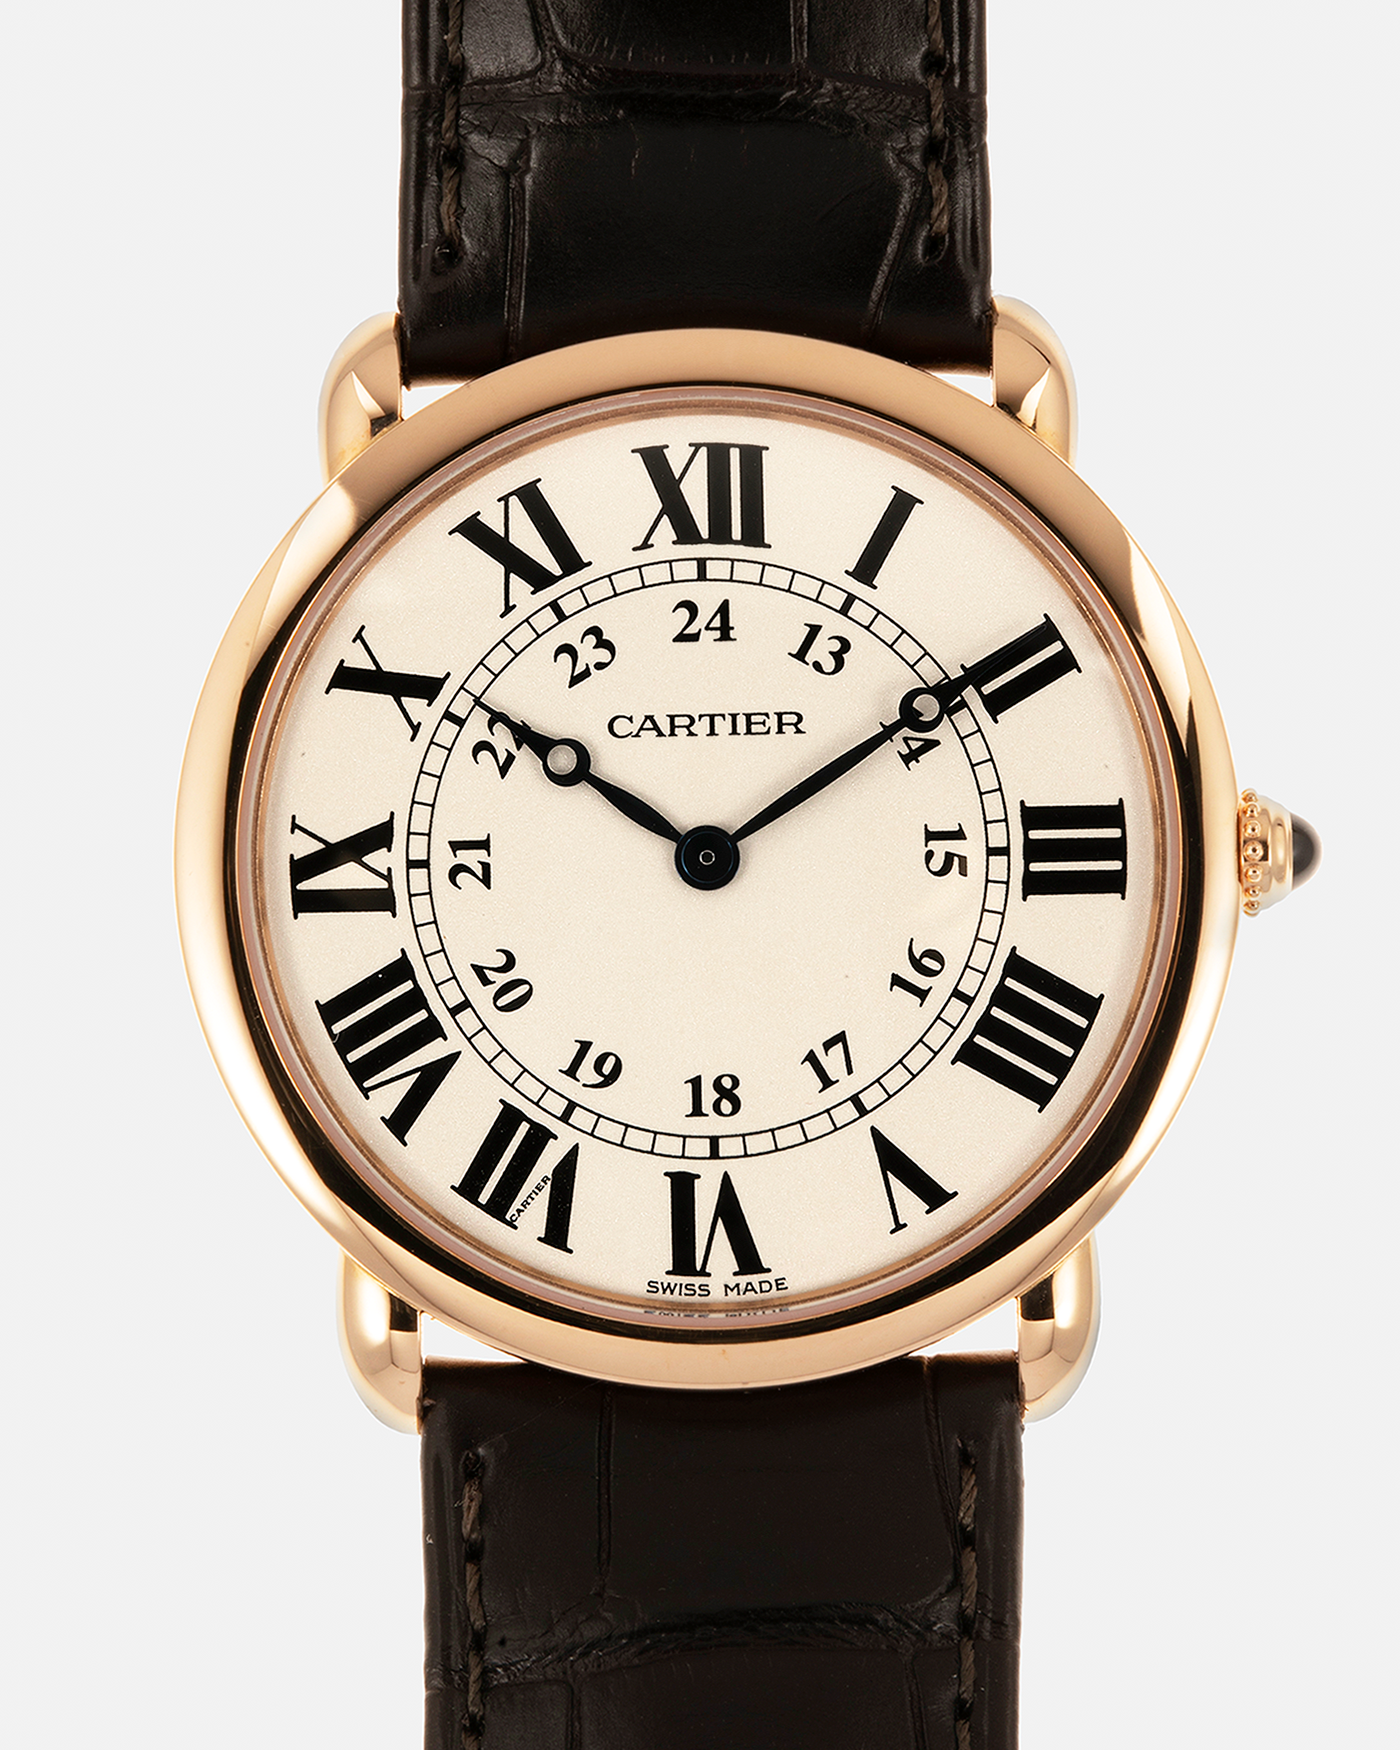 Brand: Cartier Year: 2022 Model: Tank Louis Cartier Reference Number: W6800251 Material: 18-carat Rose Gold Movement: Cartier Cal. 430MC (Based on Piaget Cal. 430P), Manual-Winding Case Dimensions: 36mm x 7.89mm Lug Width: 20mm Strap: Cartier Dark Brown Alligator Leather Strap with Signed 18-carat Rose Gold Tang Buckle